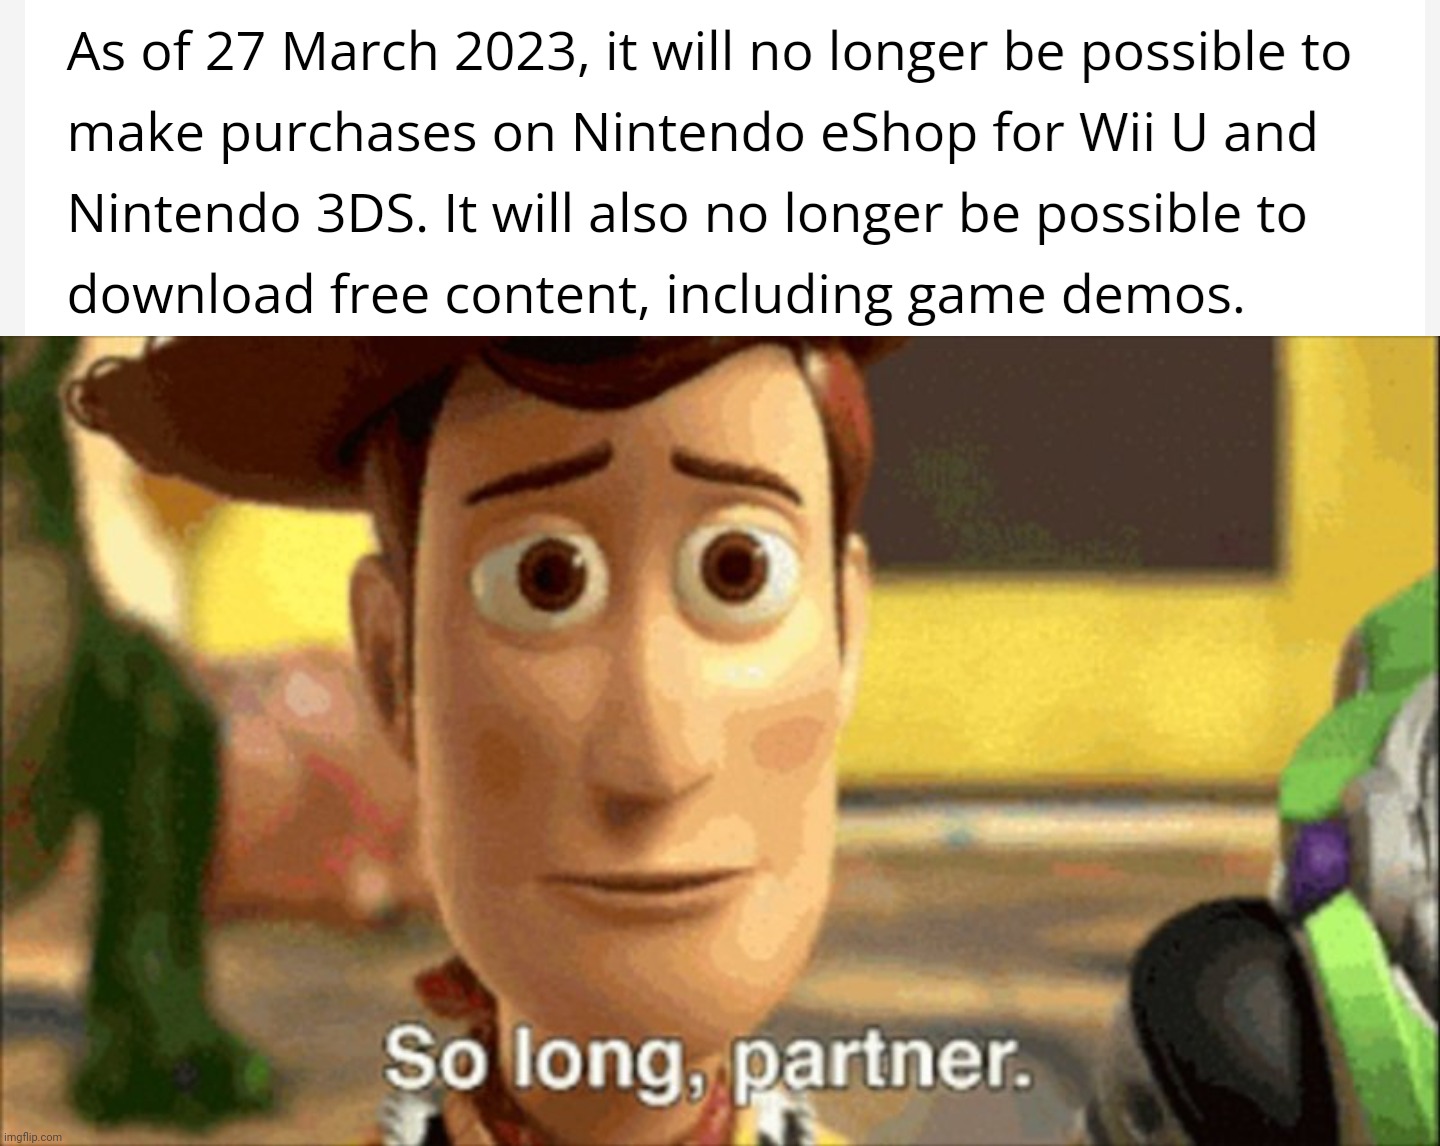 Only nineteen days left... | image tagged in so long partner,toy story,nintendo,memes | made w/ Imgflip meme maker